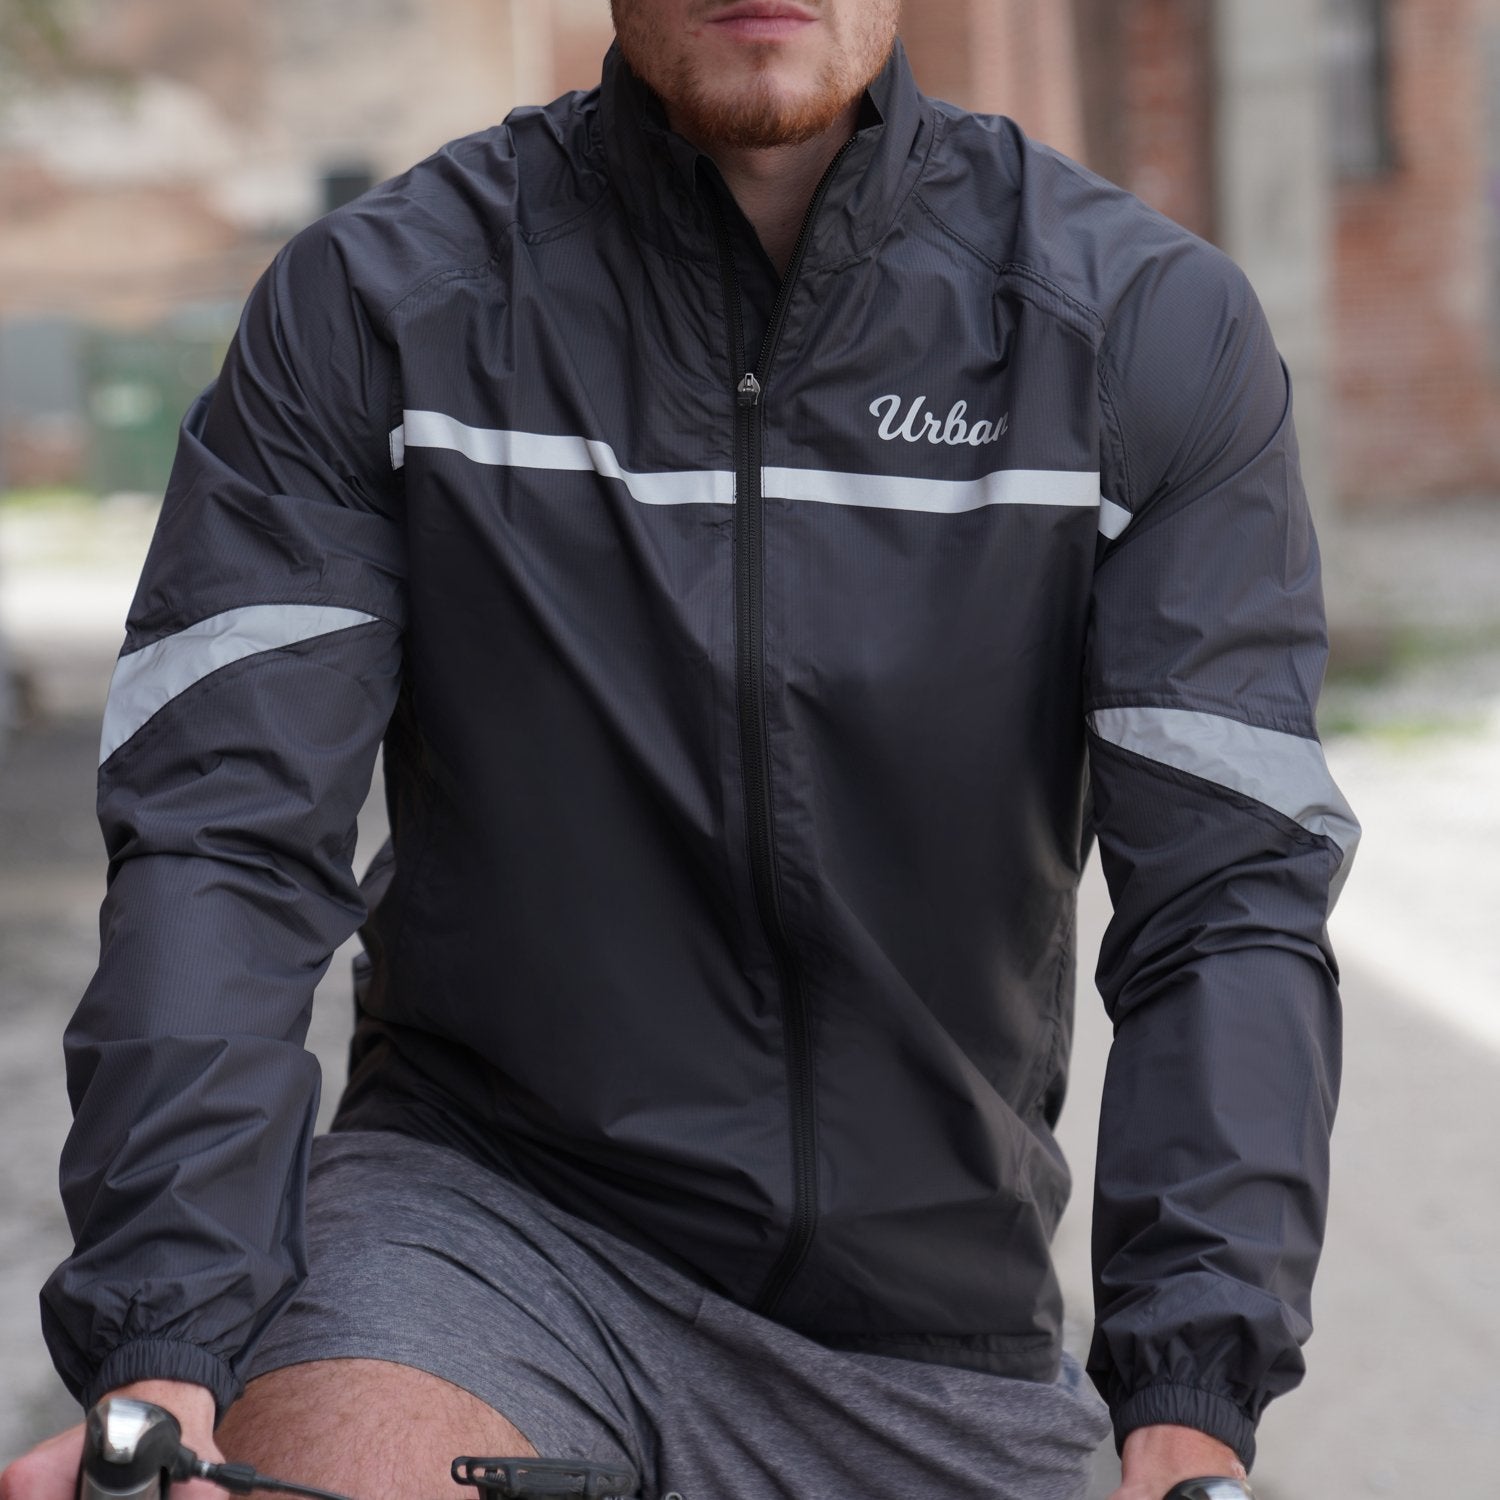 Windproof & Commuters Cycling Jacket - Black - Urban Cycling Apparel